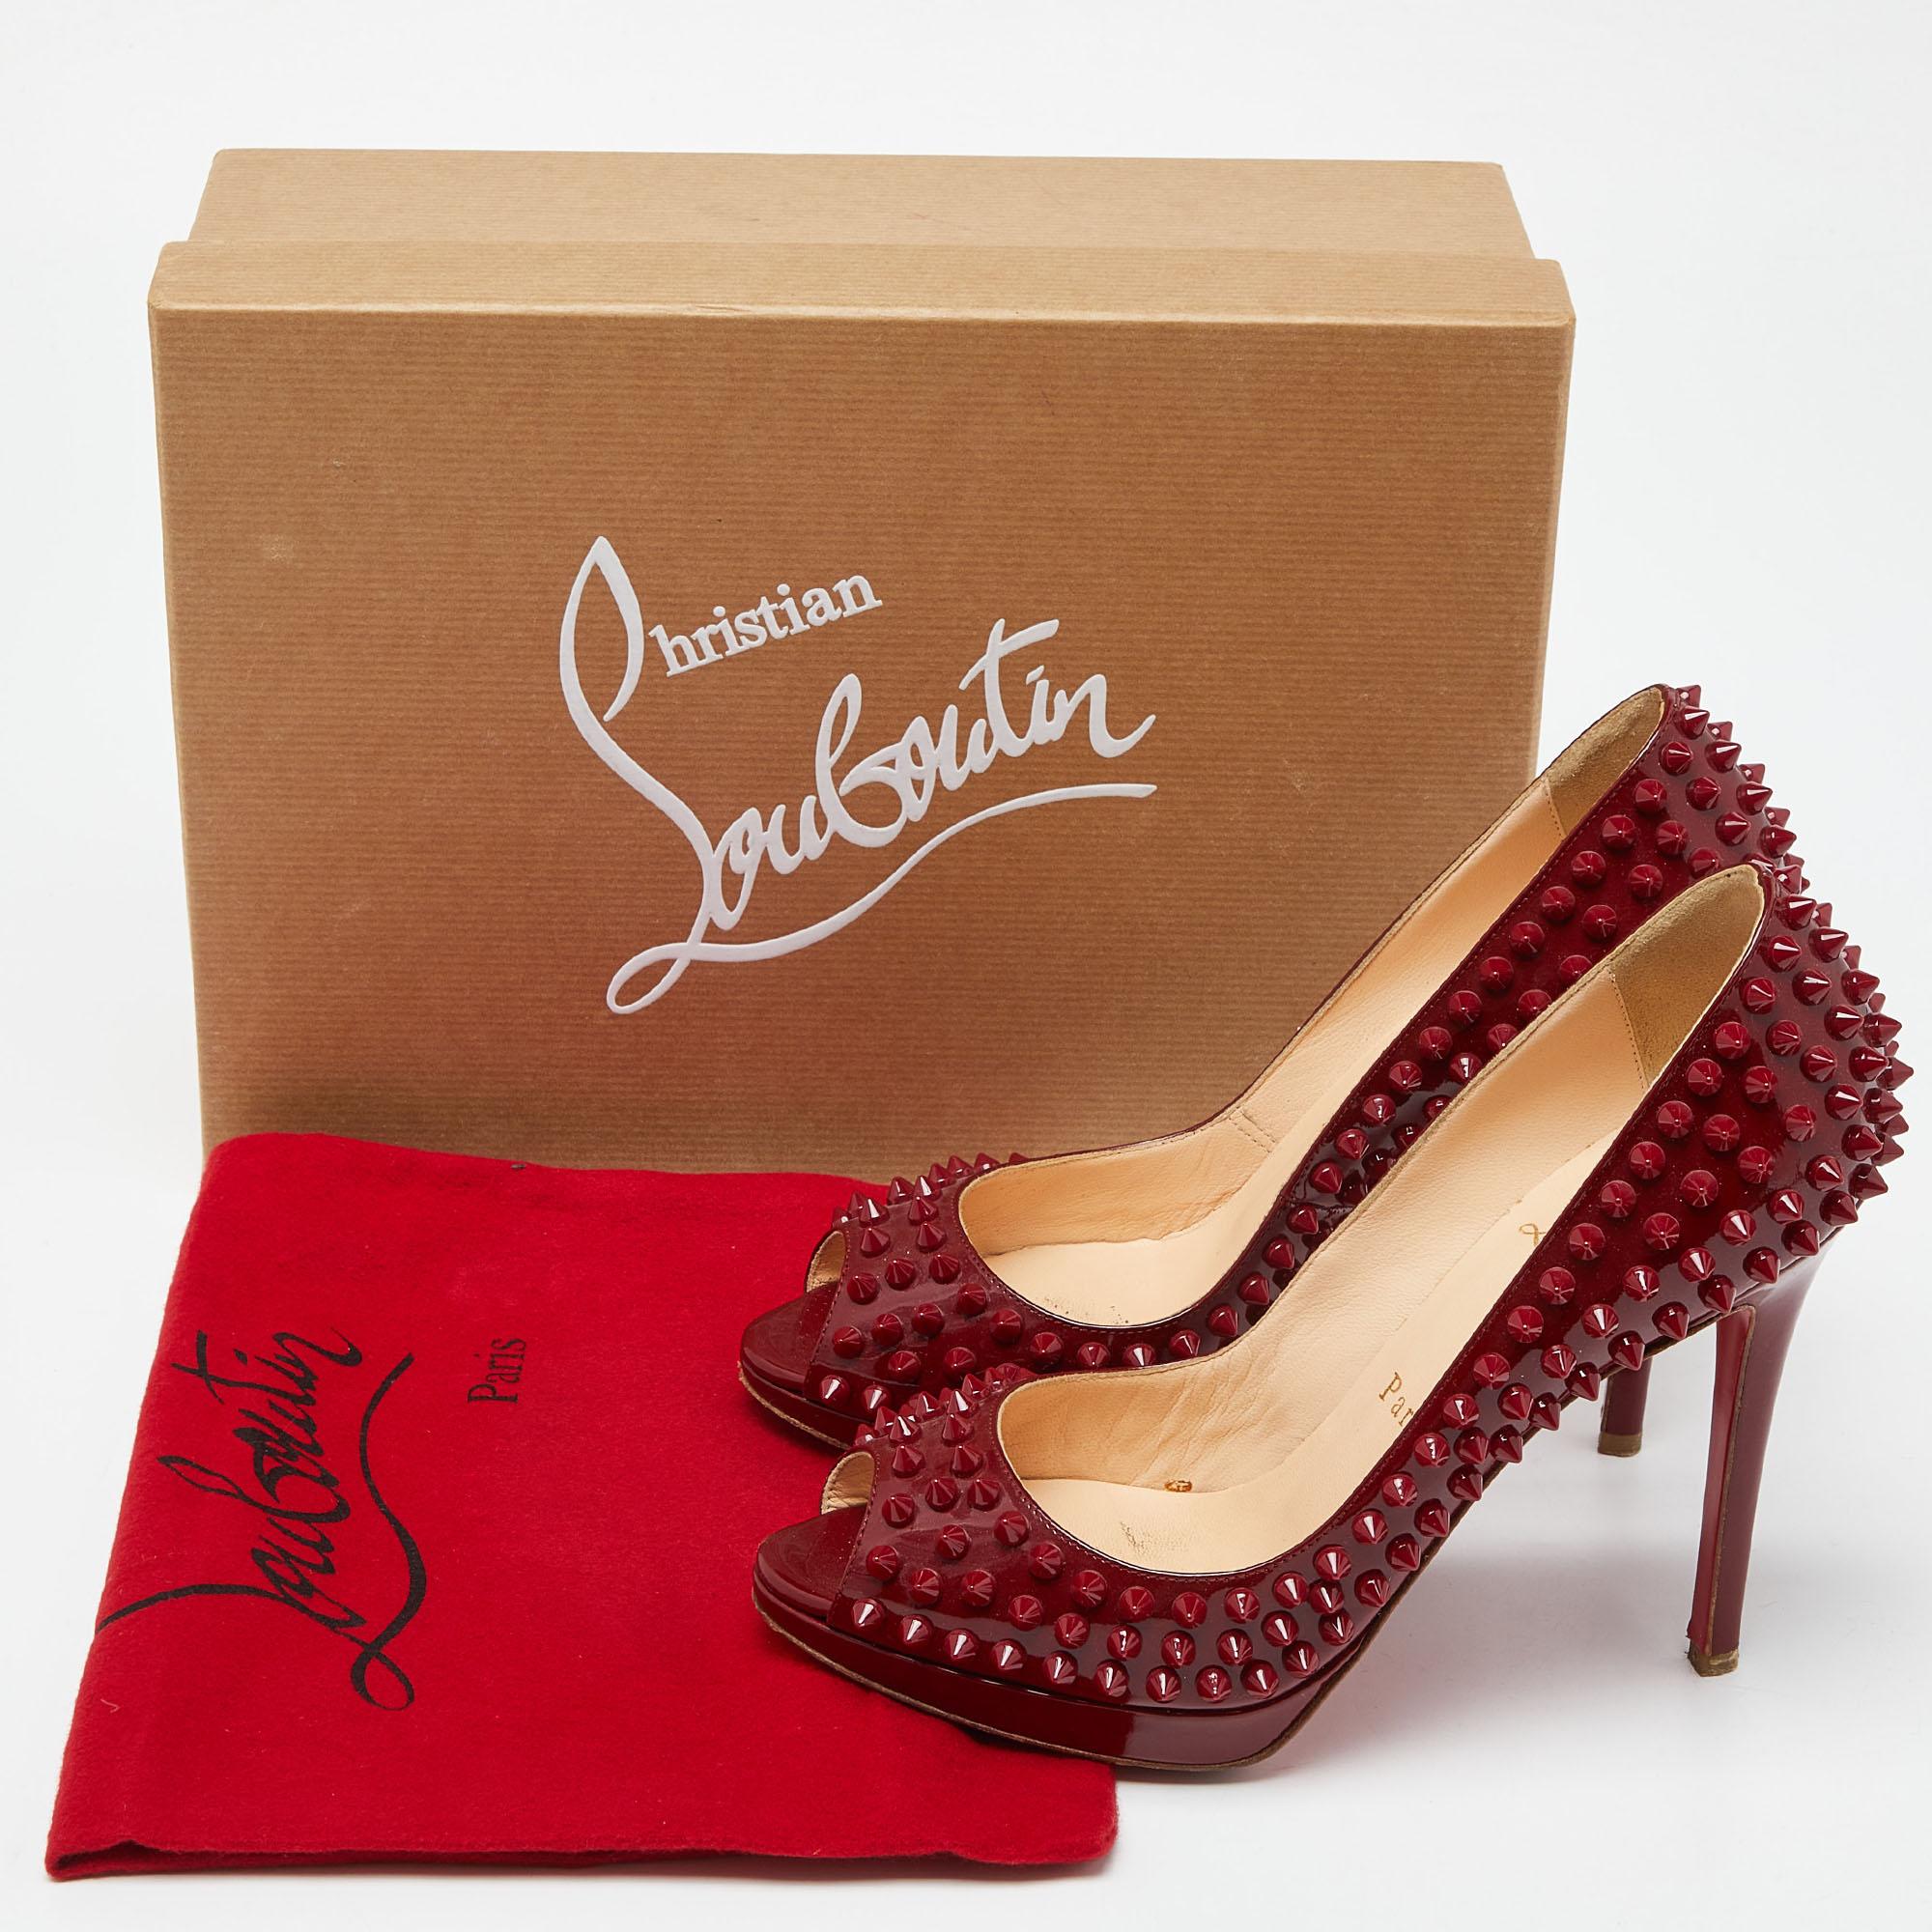 Christian Louboutin Red Patent Leather Yolanda Spiked Peep-Toe Pumps Size 37.5 For Sale 5